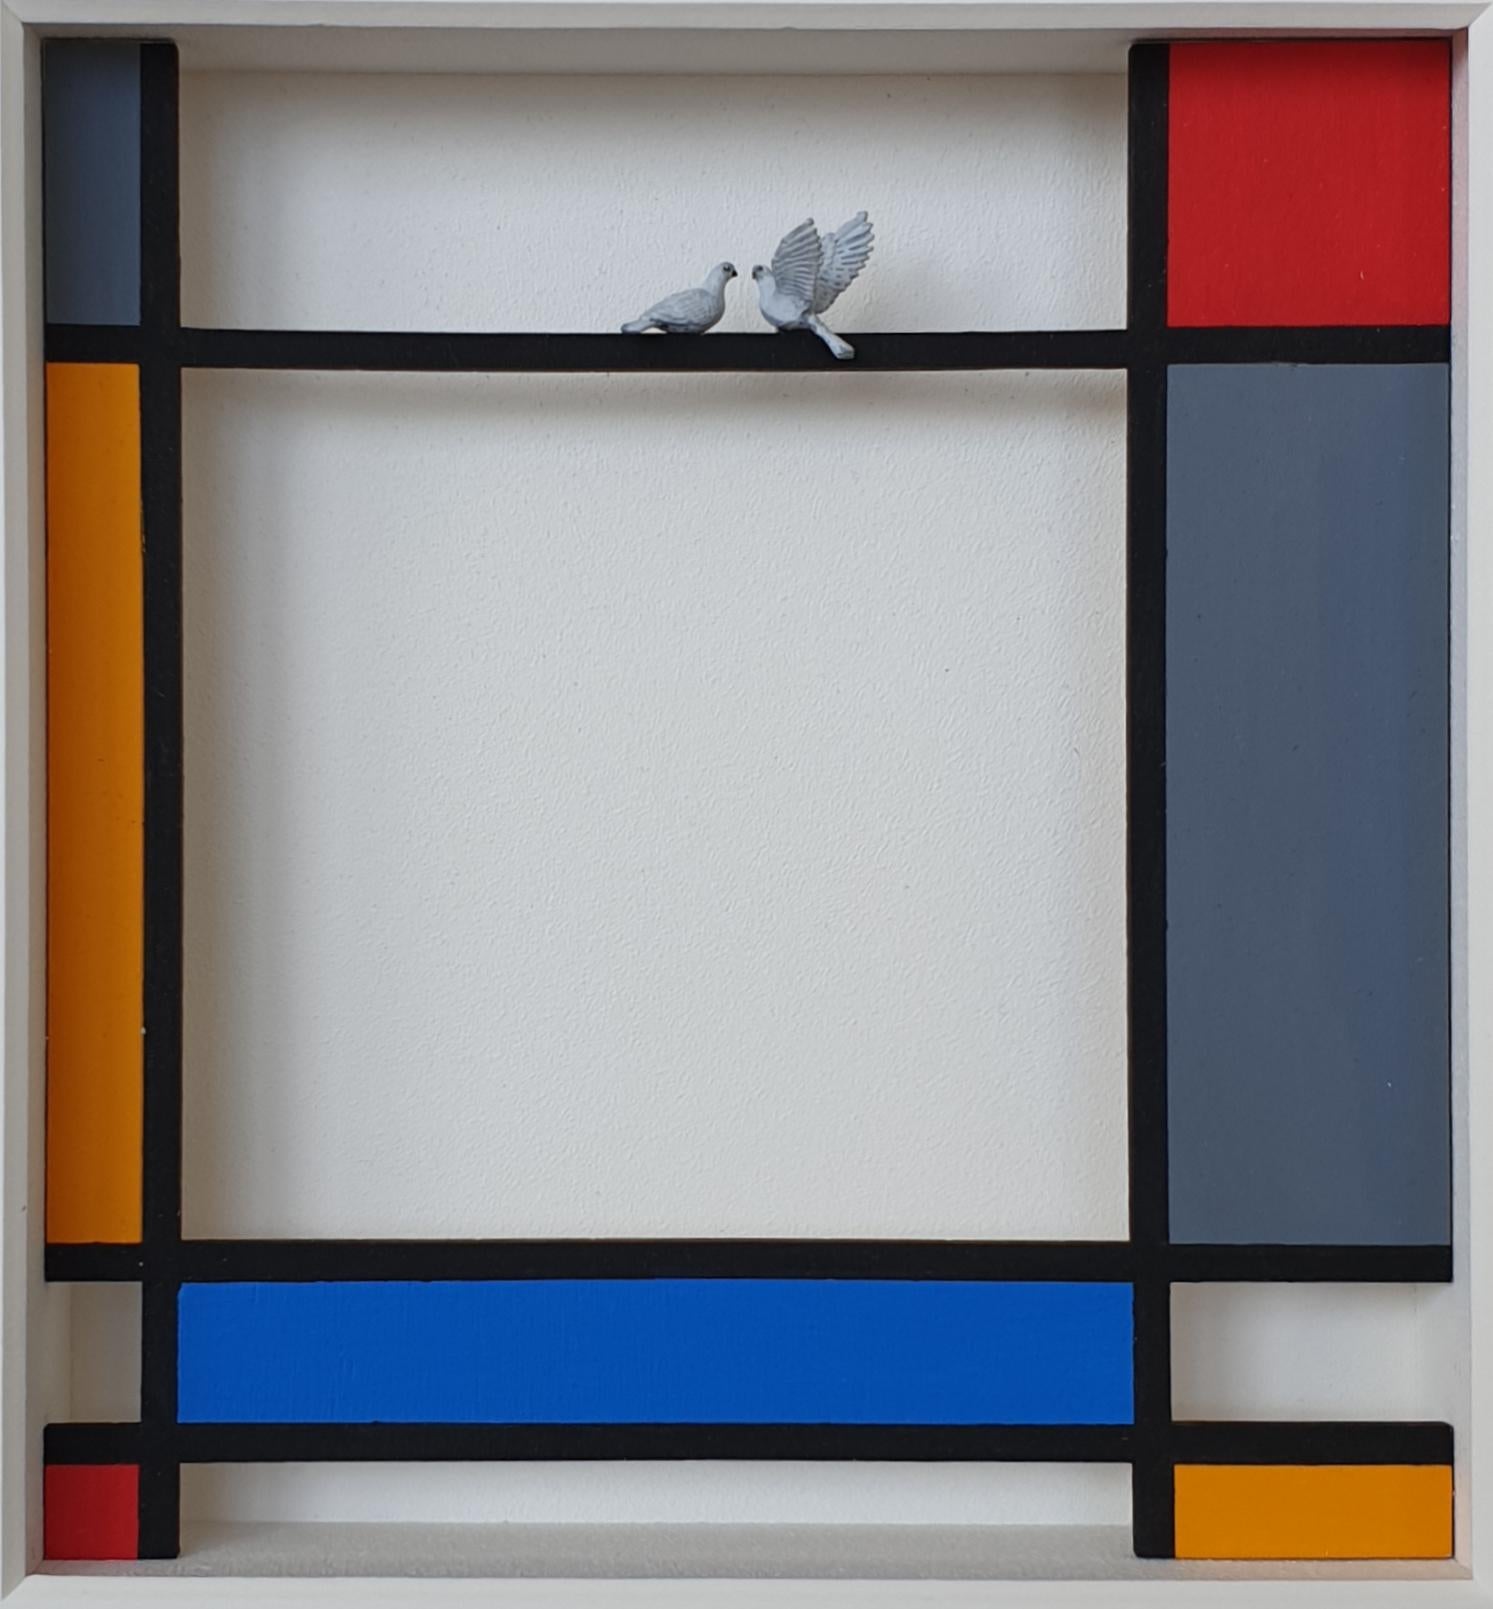 Homage to Mondrian - Perch - contemporary art work, design tribute Dutch master - Mixed Media Art by Volker Kuhn